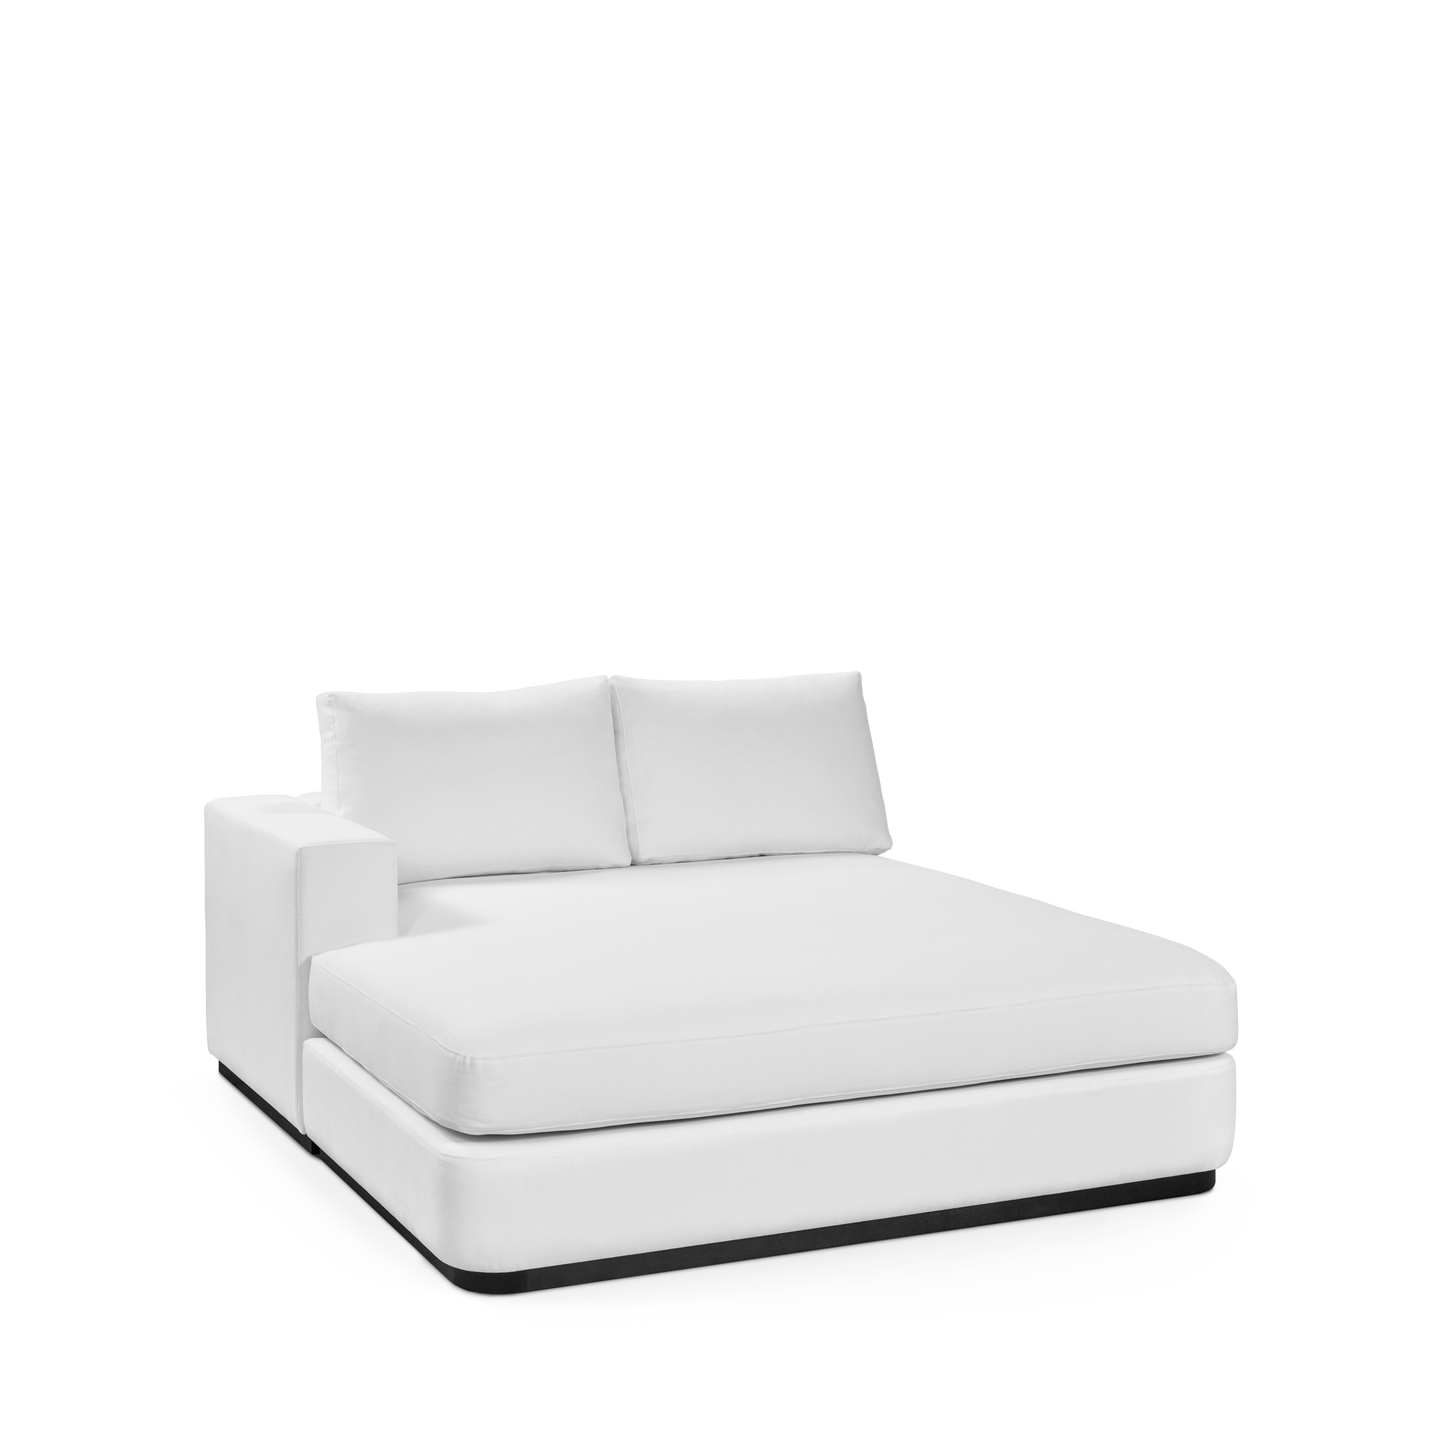 Front view ATLAS 160 Lounge Bed arm rest left with white textile